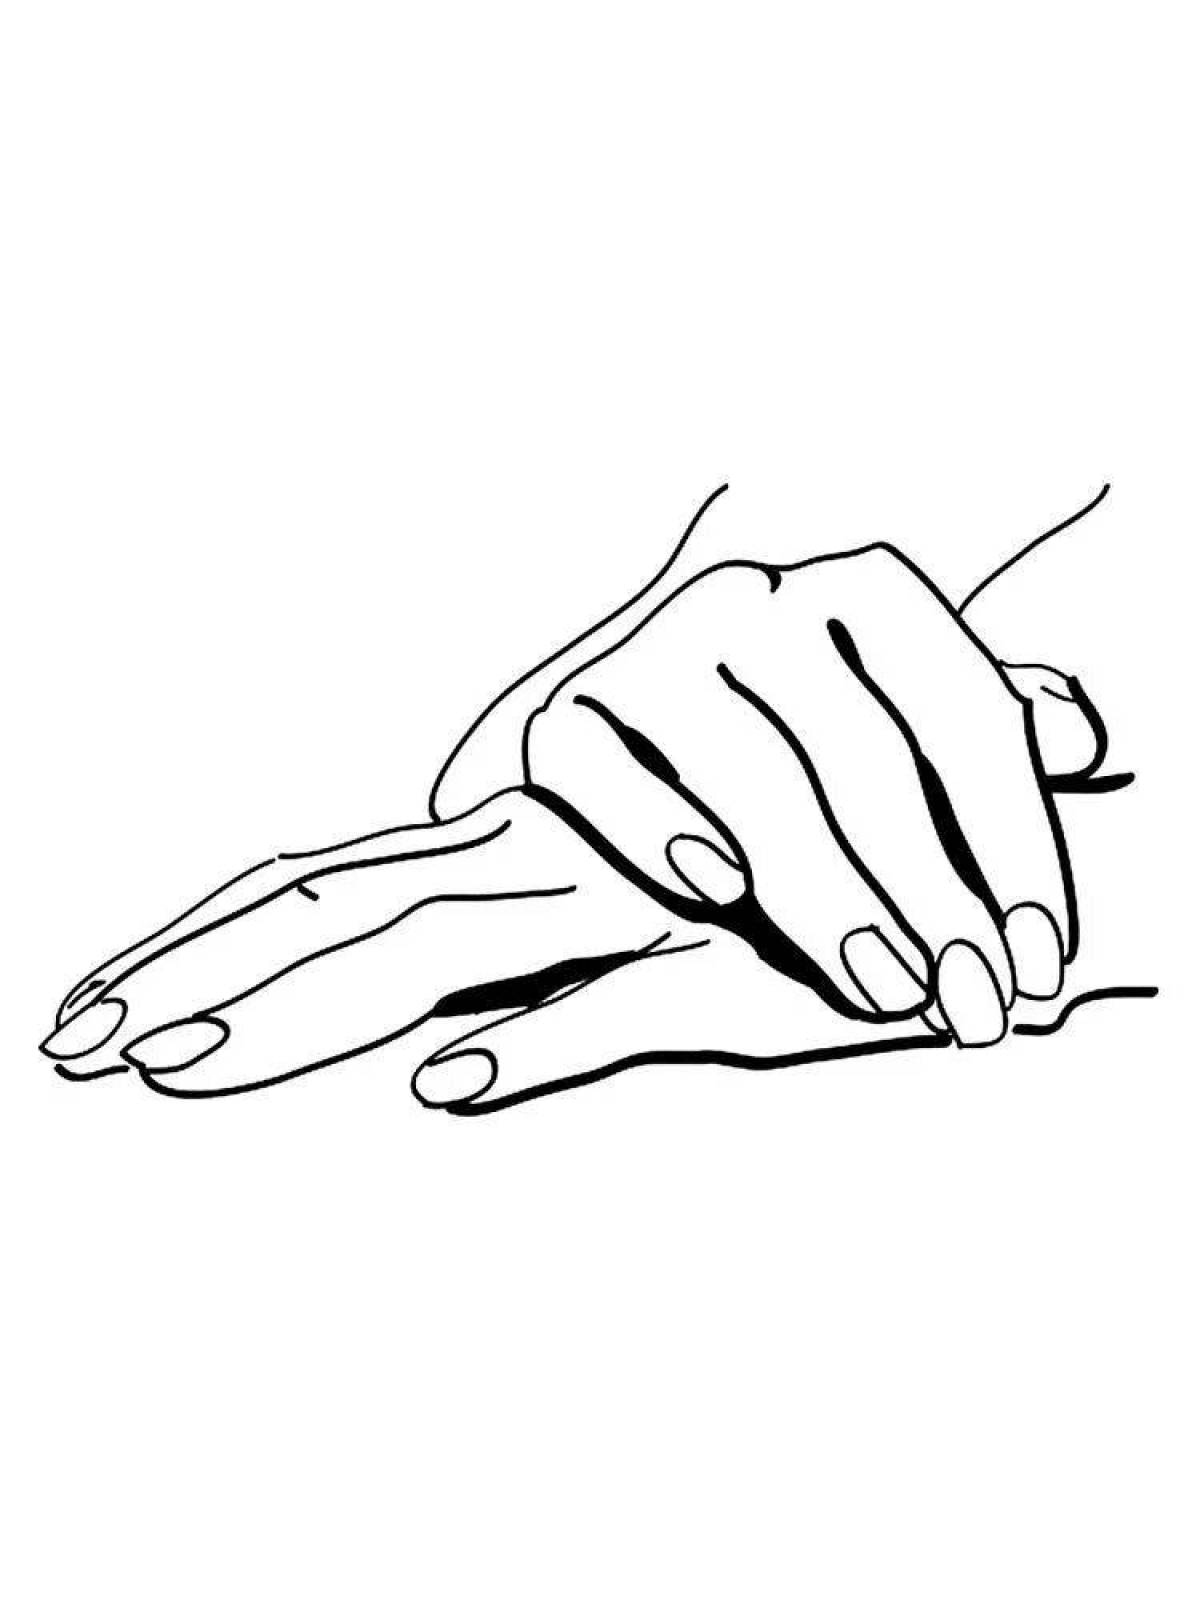 Coloring unusual hand with long nails